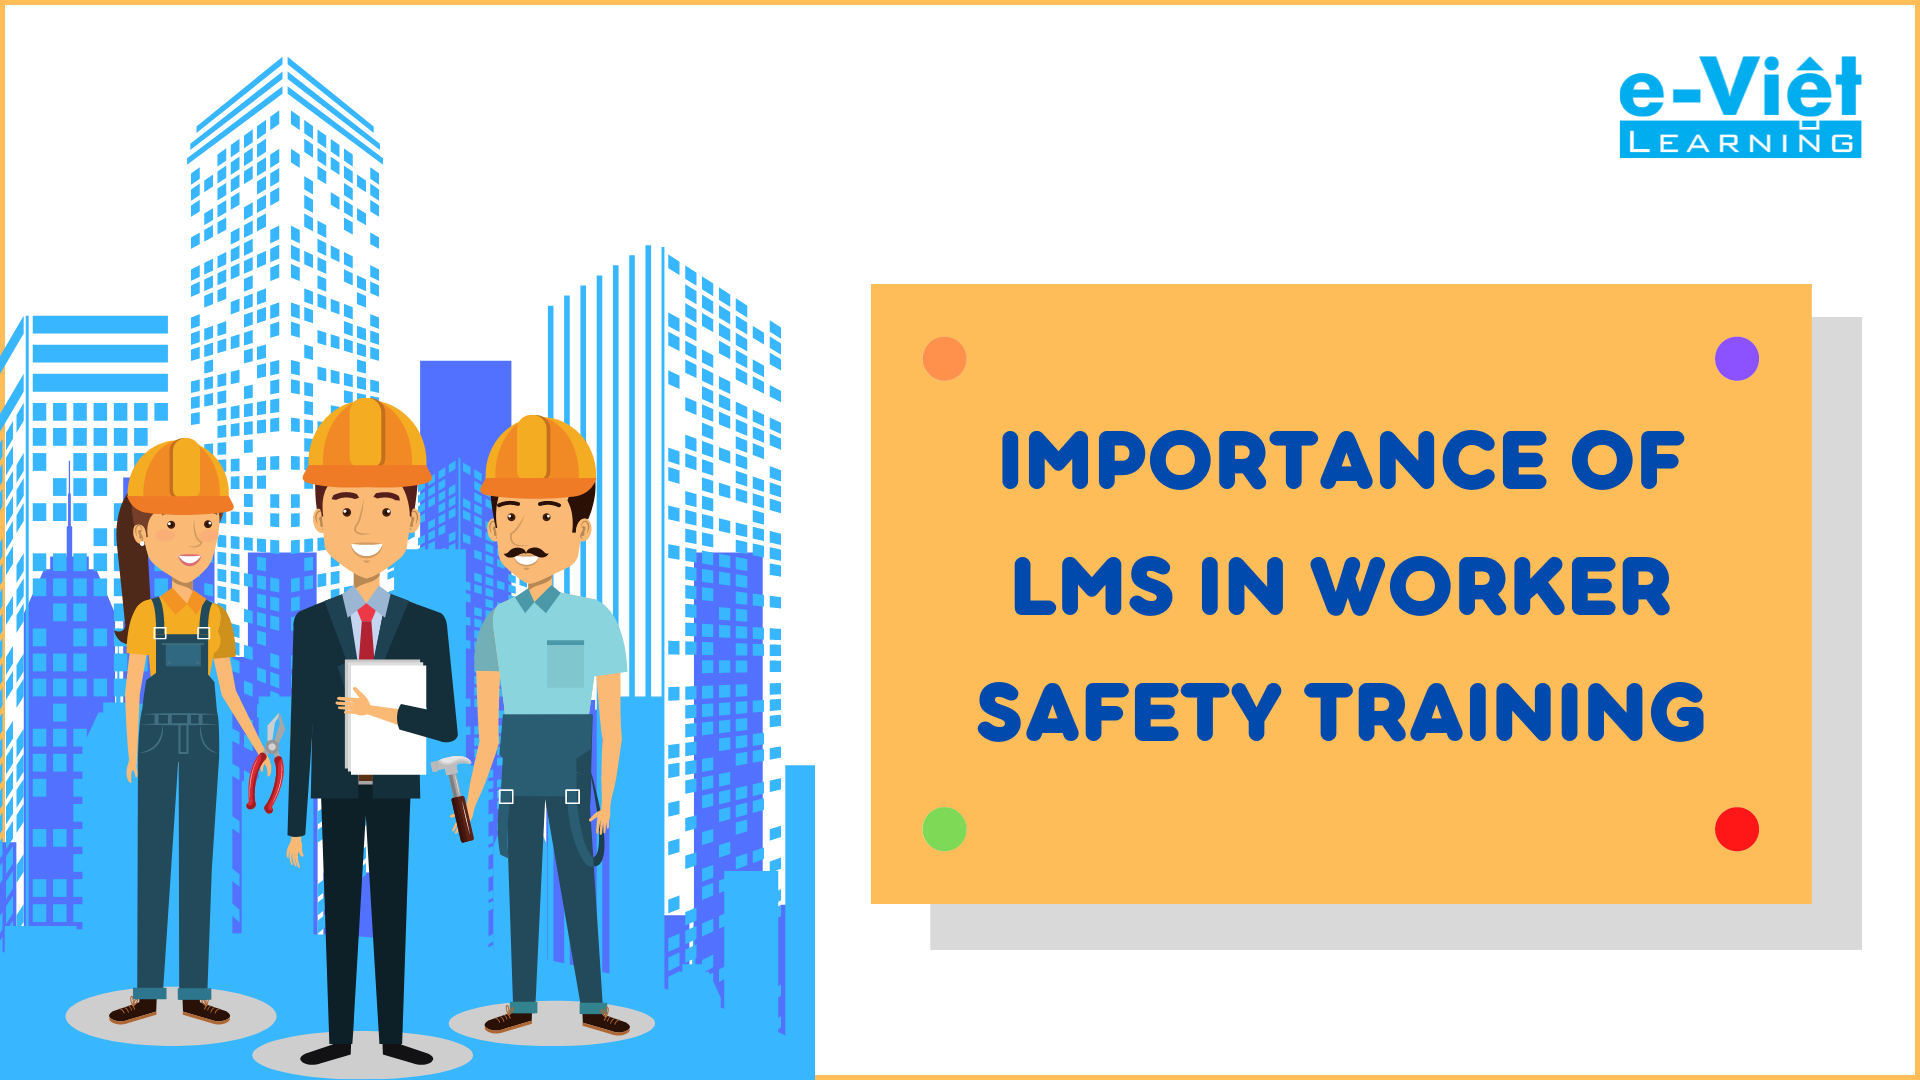 IMPORTANCE OF LMS IN WORKER SAFETY TRAINING